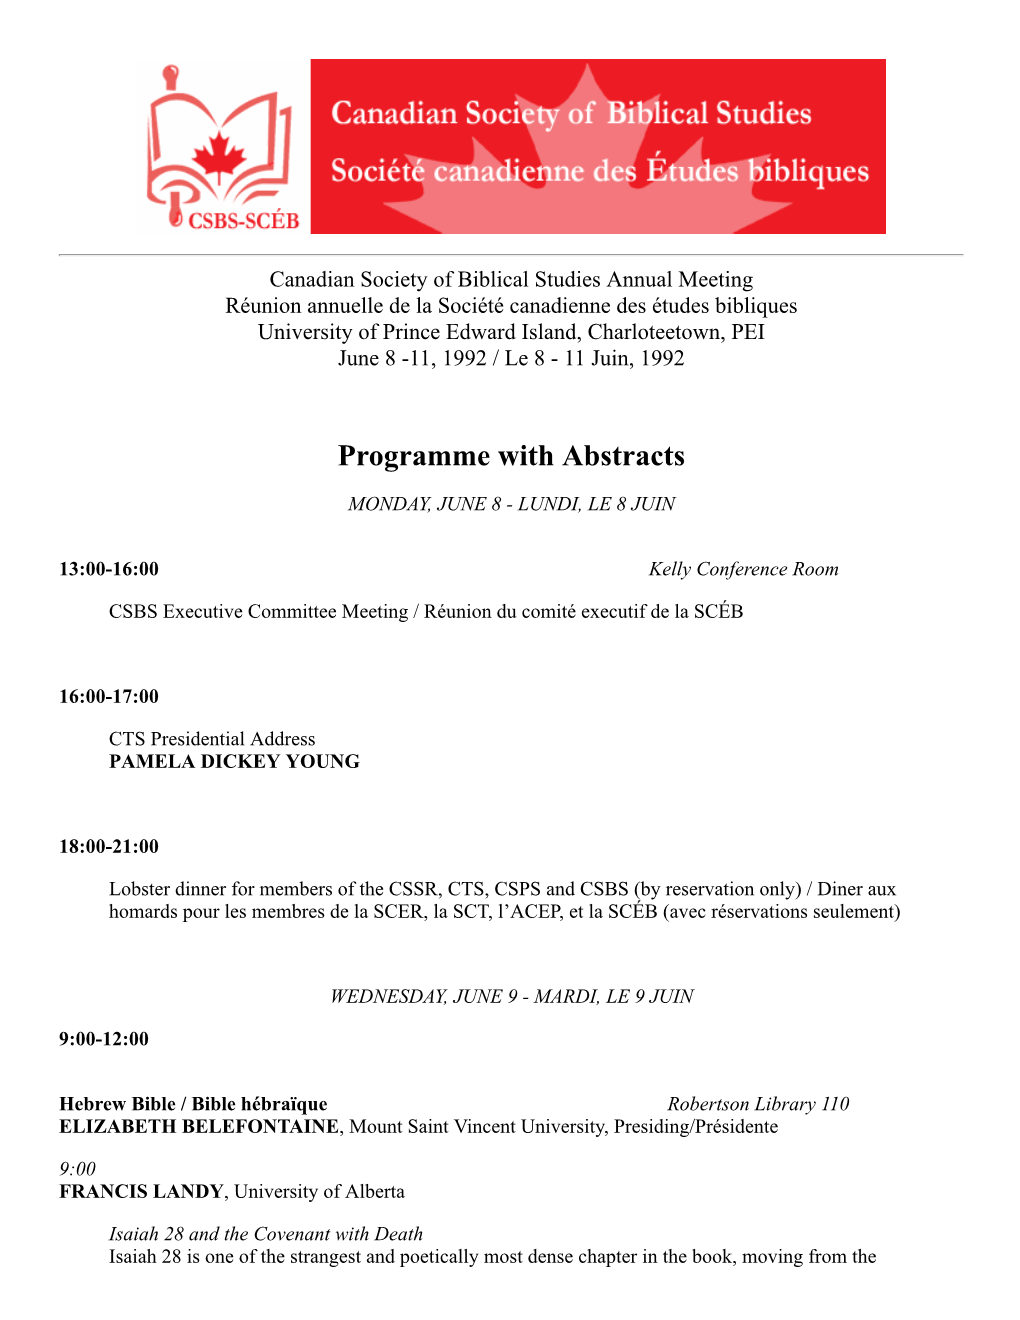 Programme with Abstracts